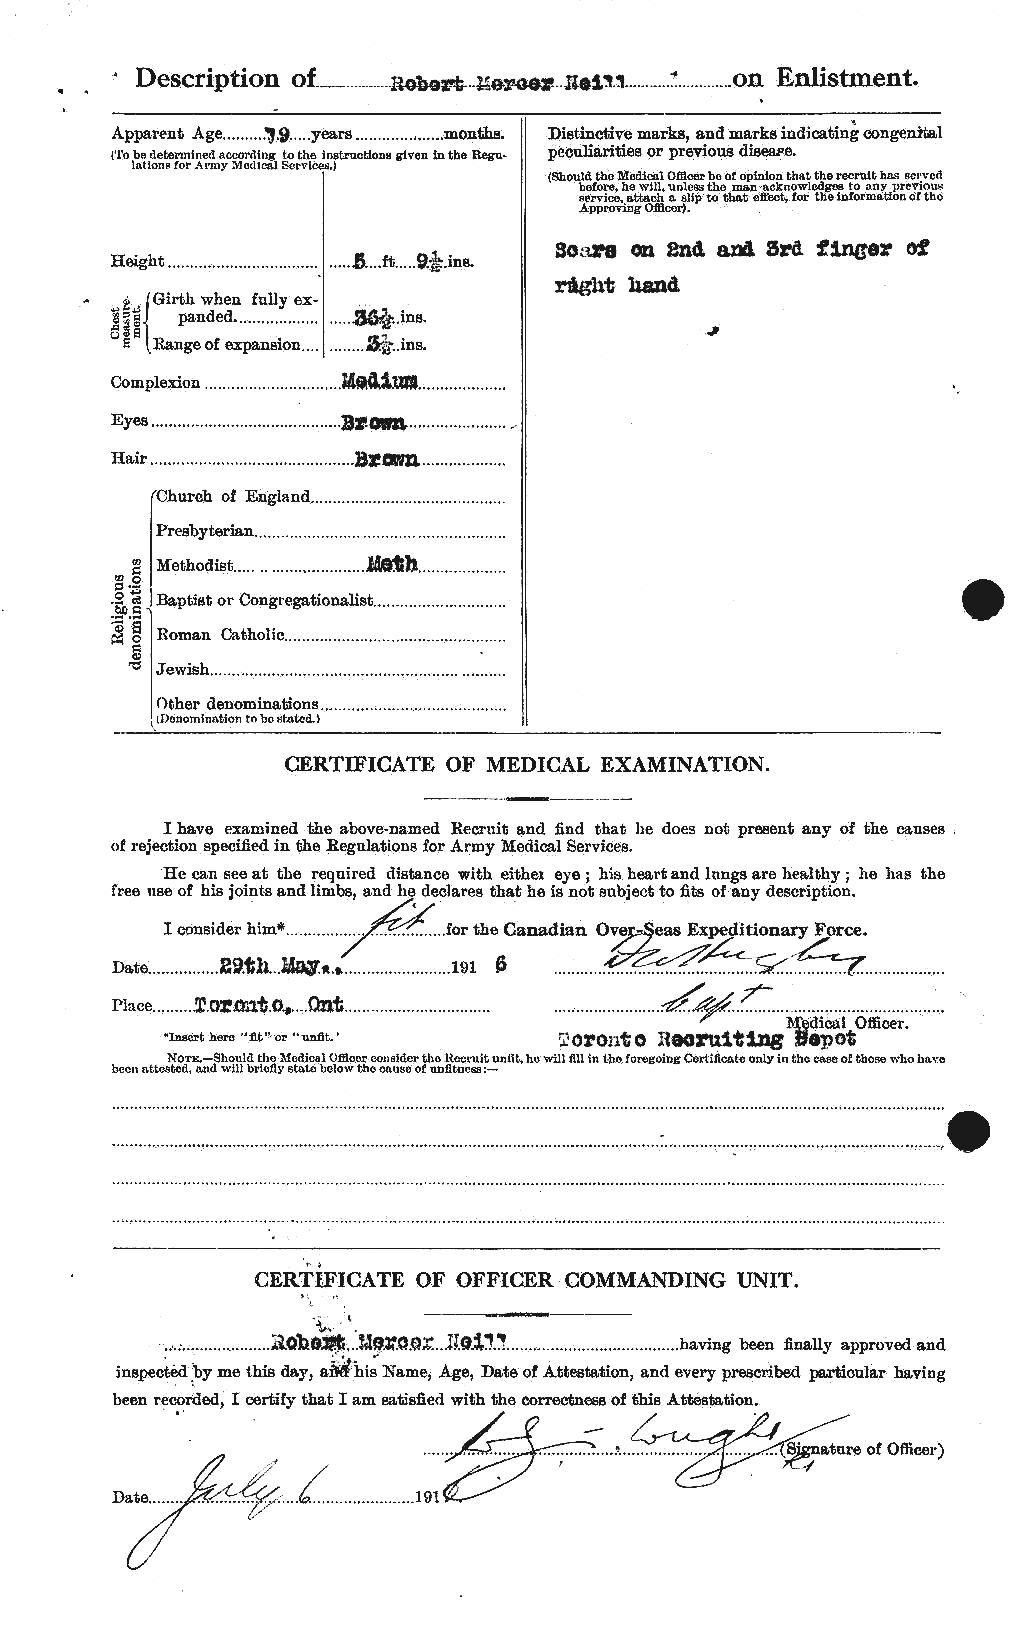 Personnel Records of the First World War - CEF 545710b